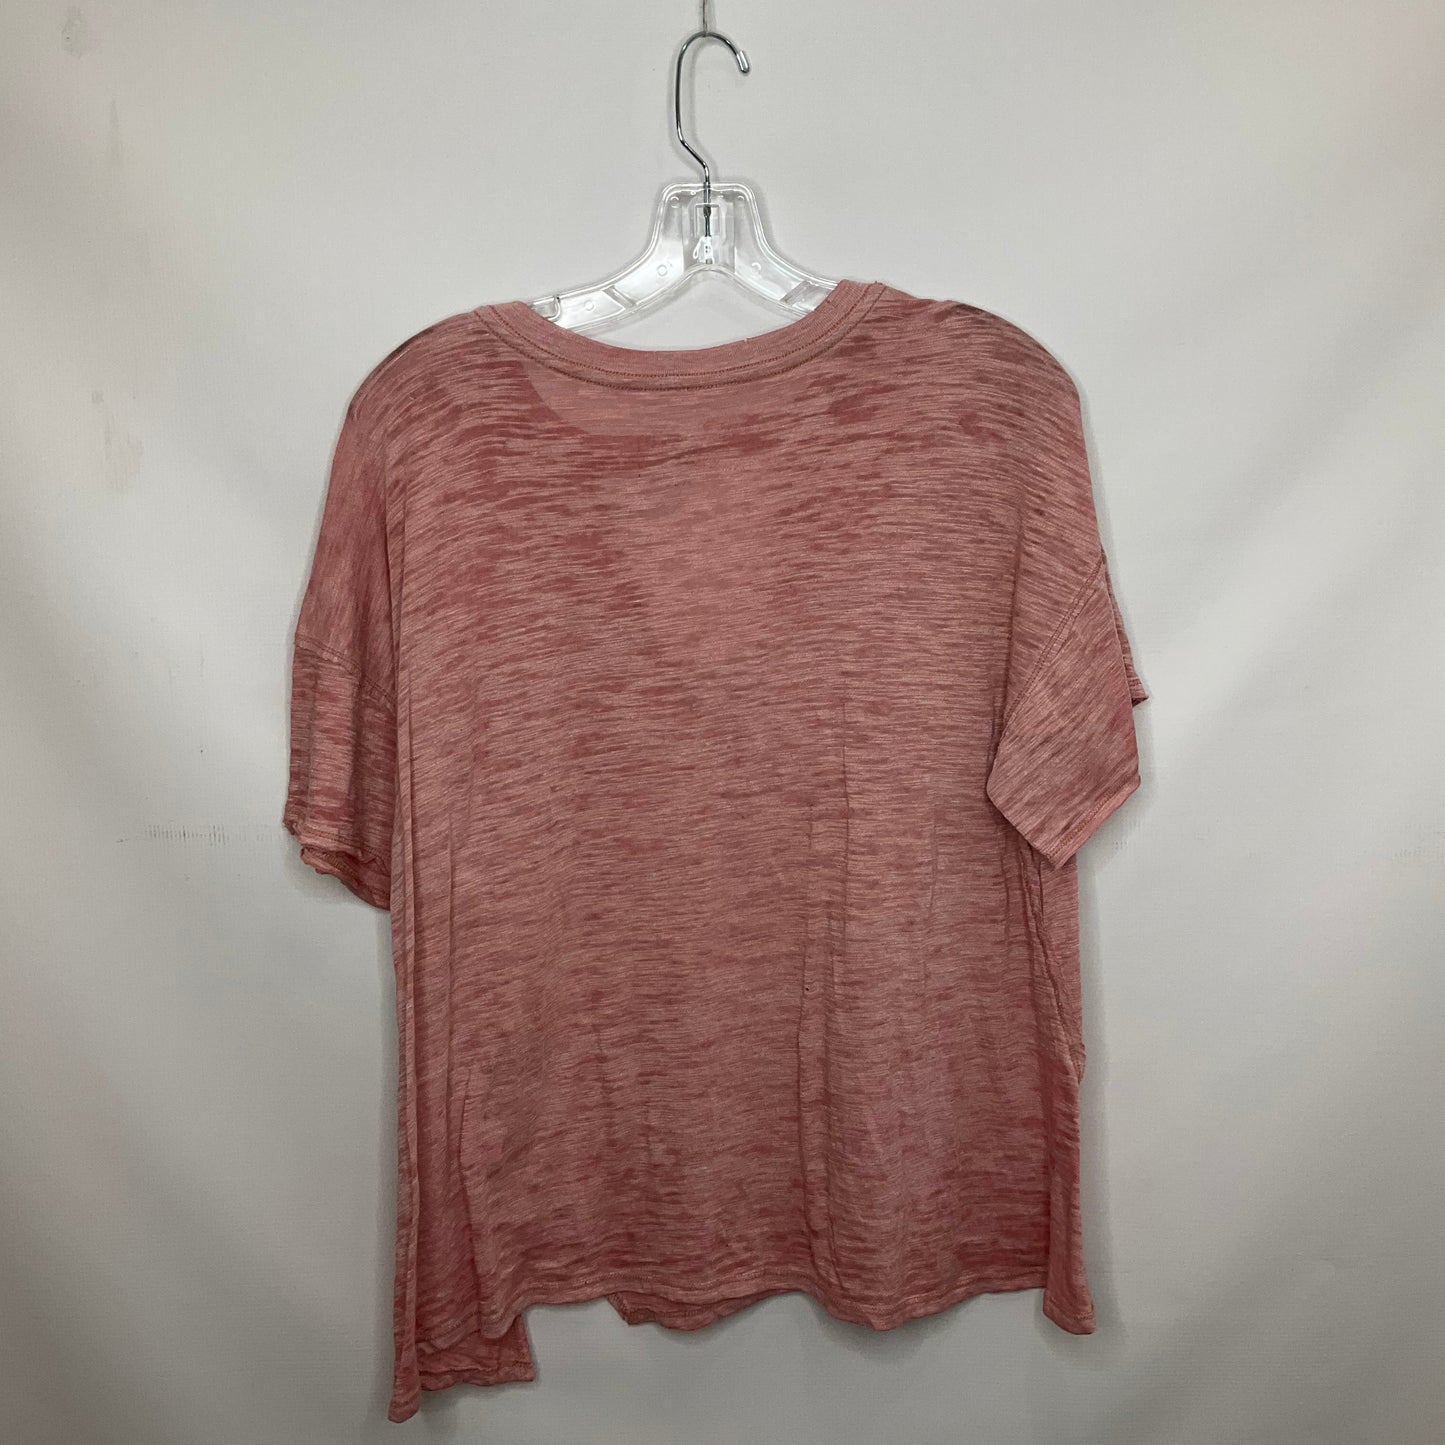 Pink Top Short Sleeve We The Free, Size S